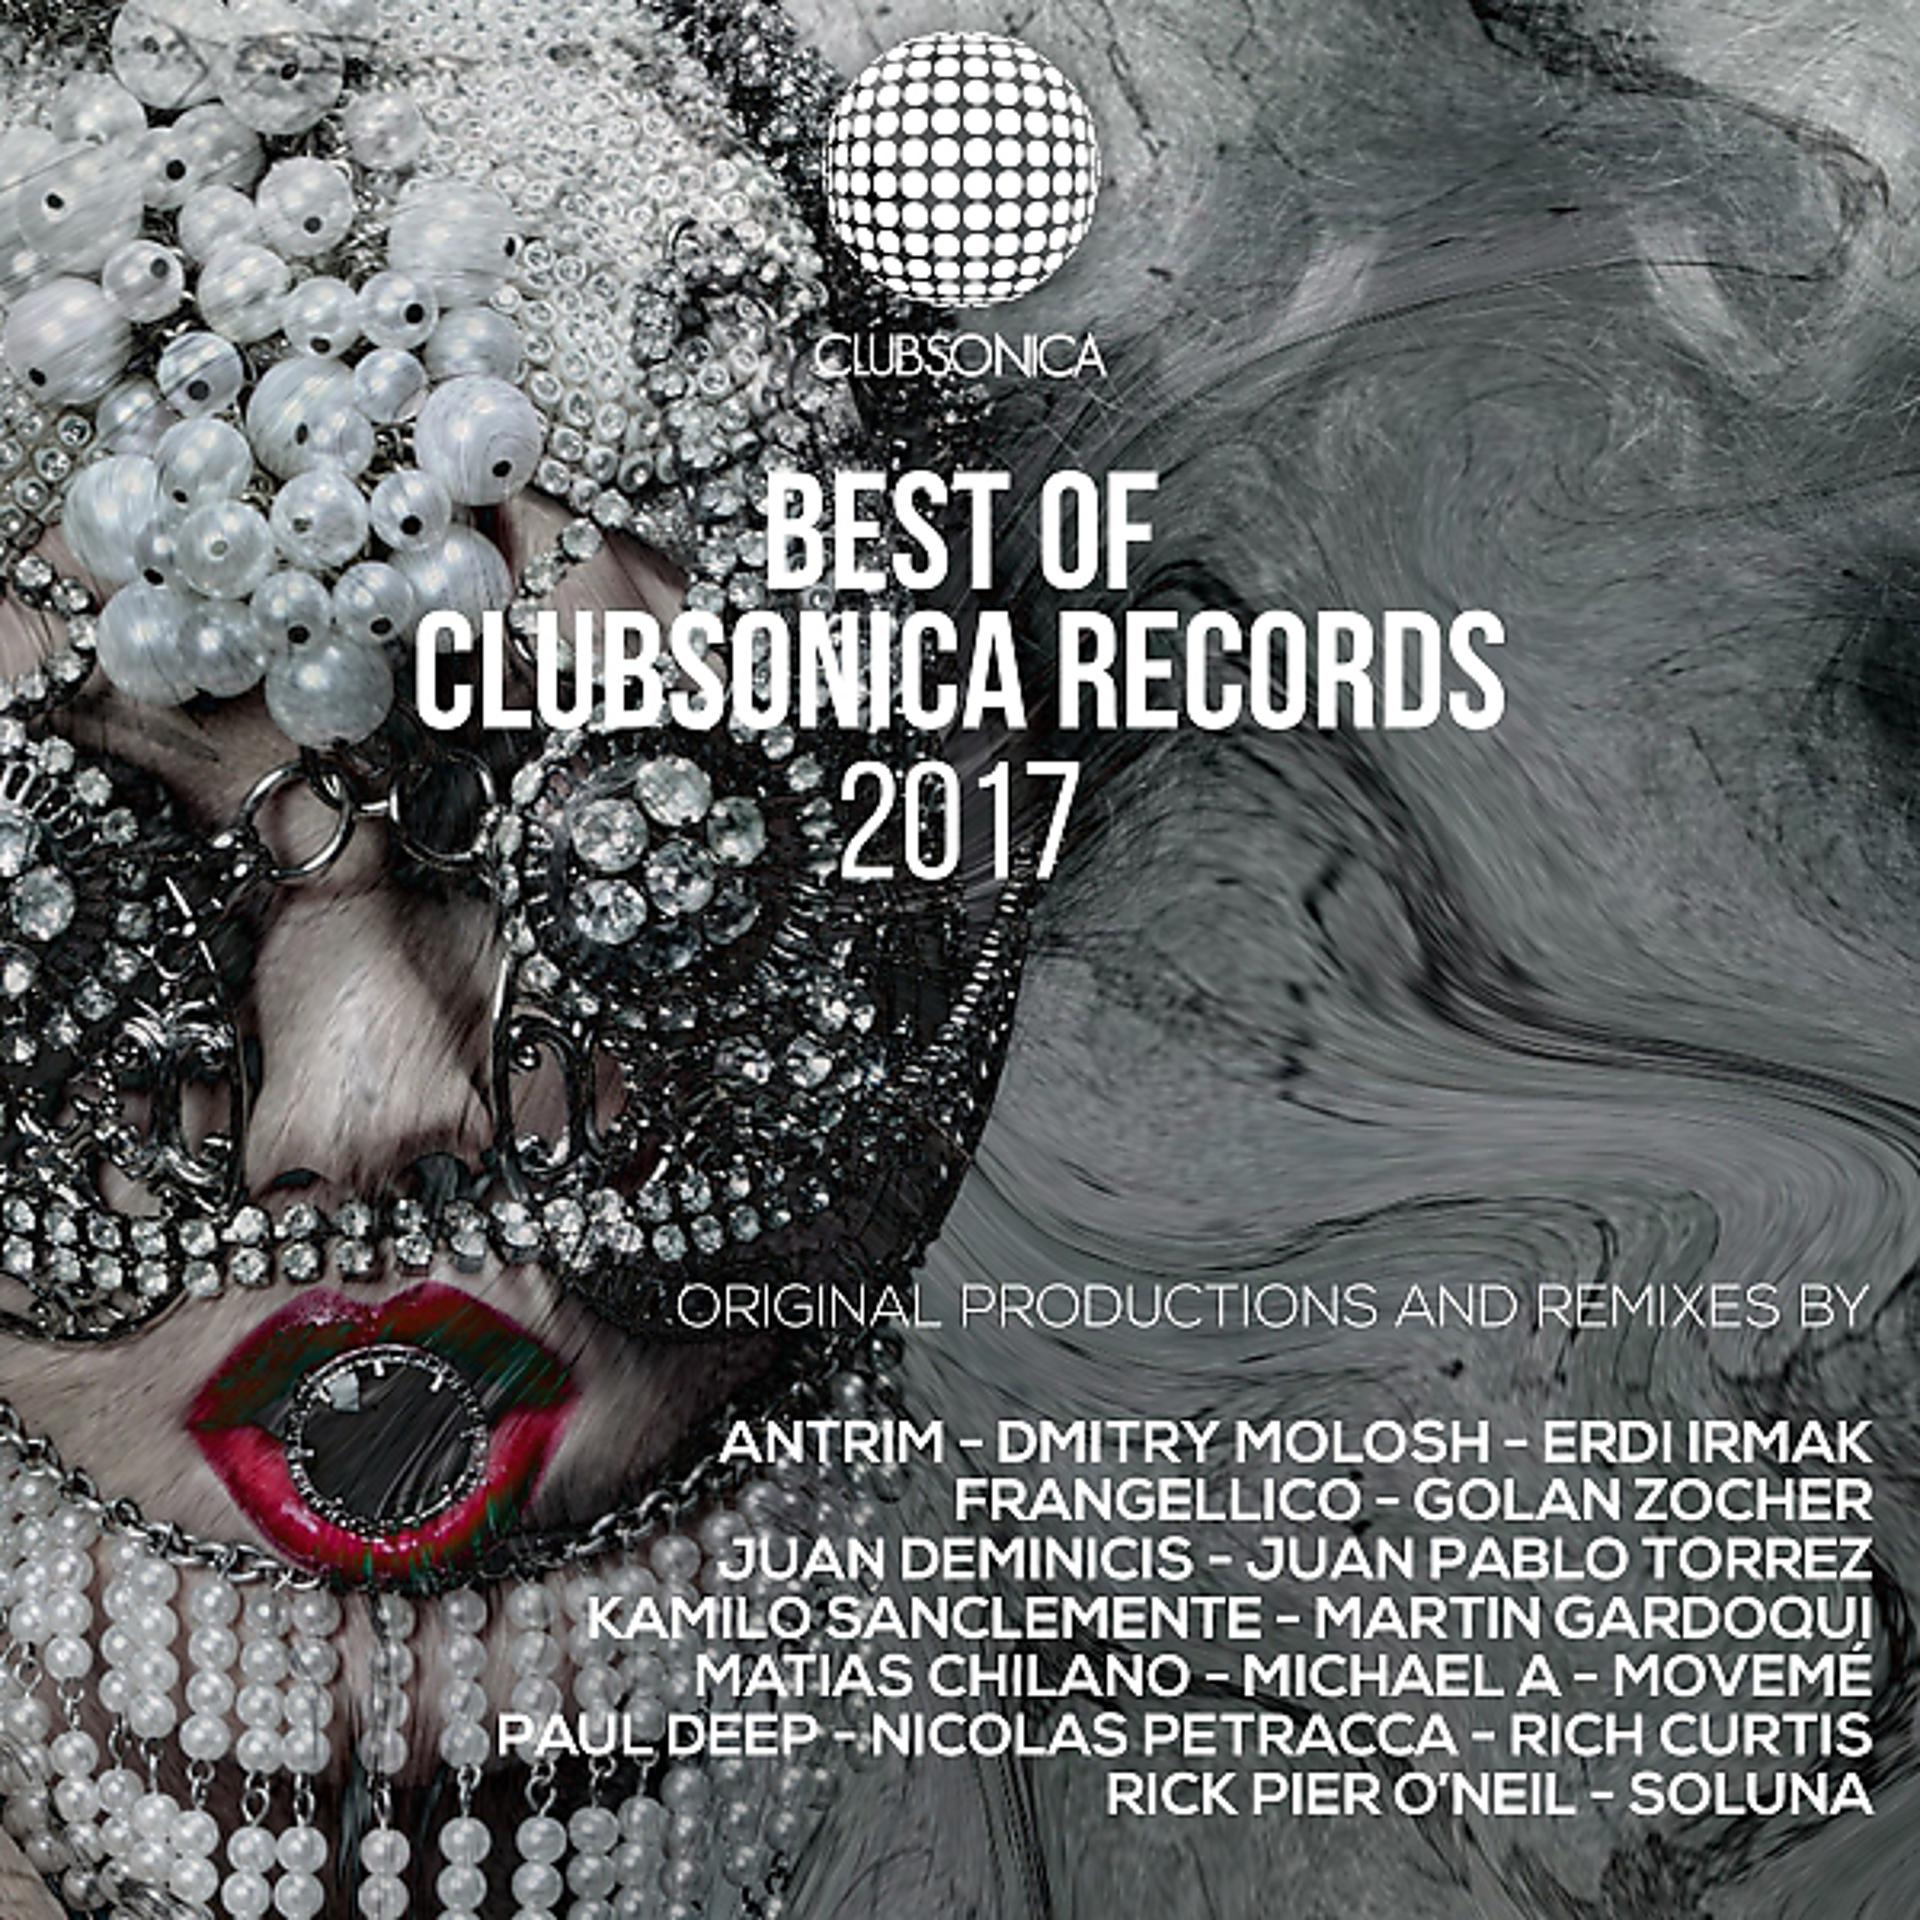 Постер альбома BEST OF CLUBSONICA RECORDS 2017